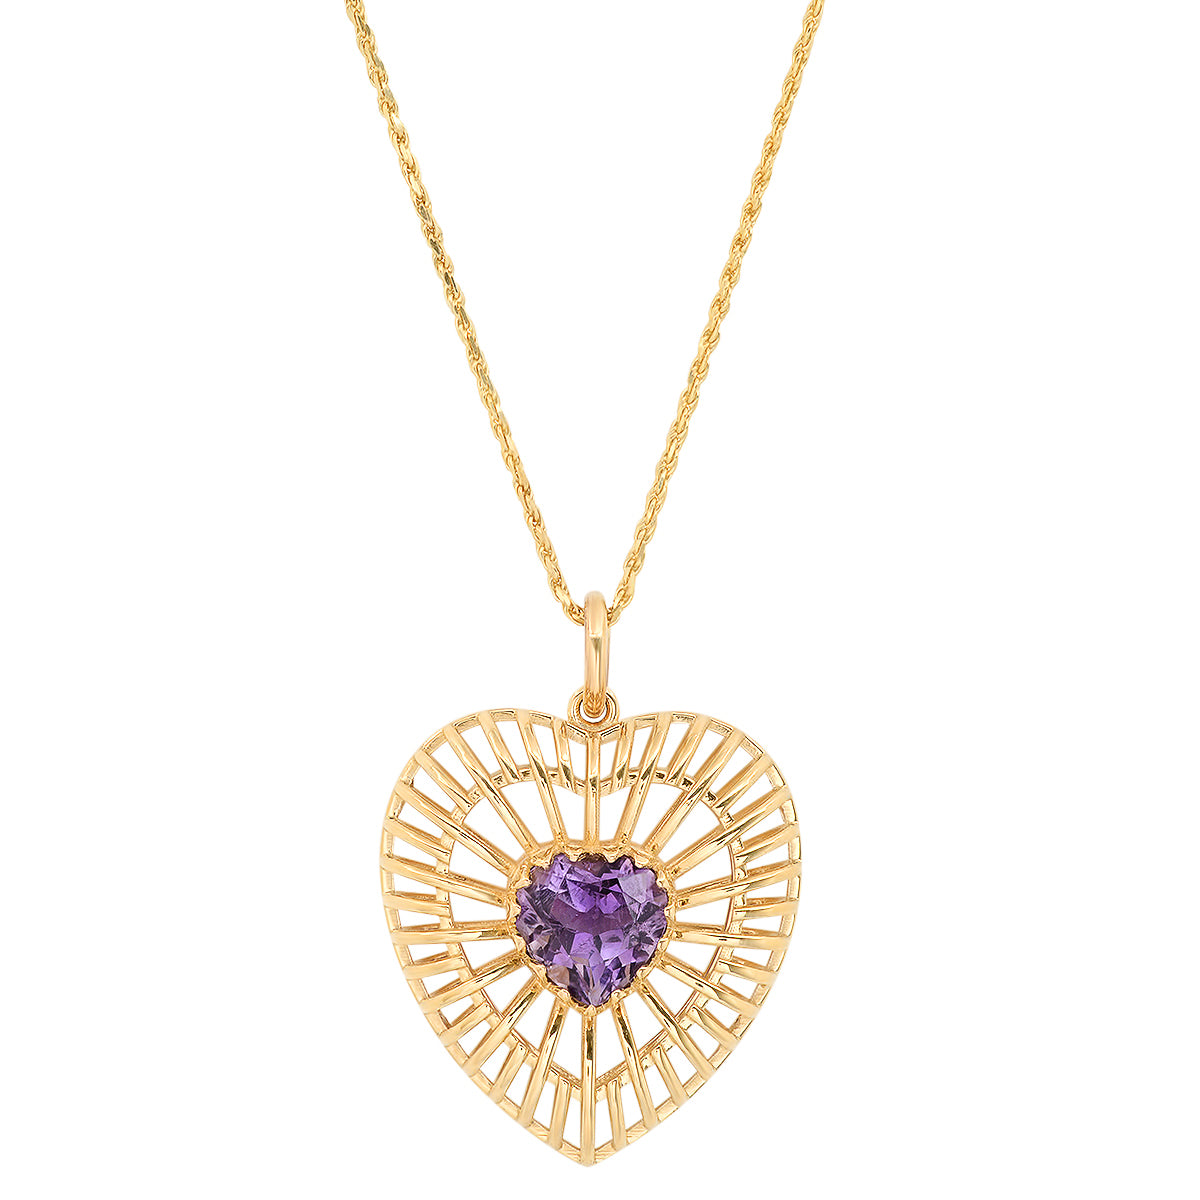 Caged Amethyst Heart Necklace - Nina Segal Jewelry